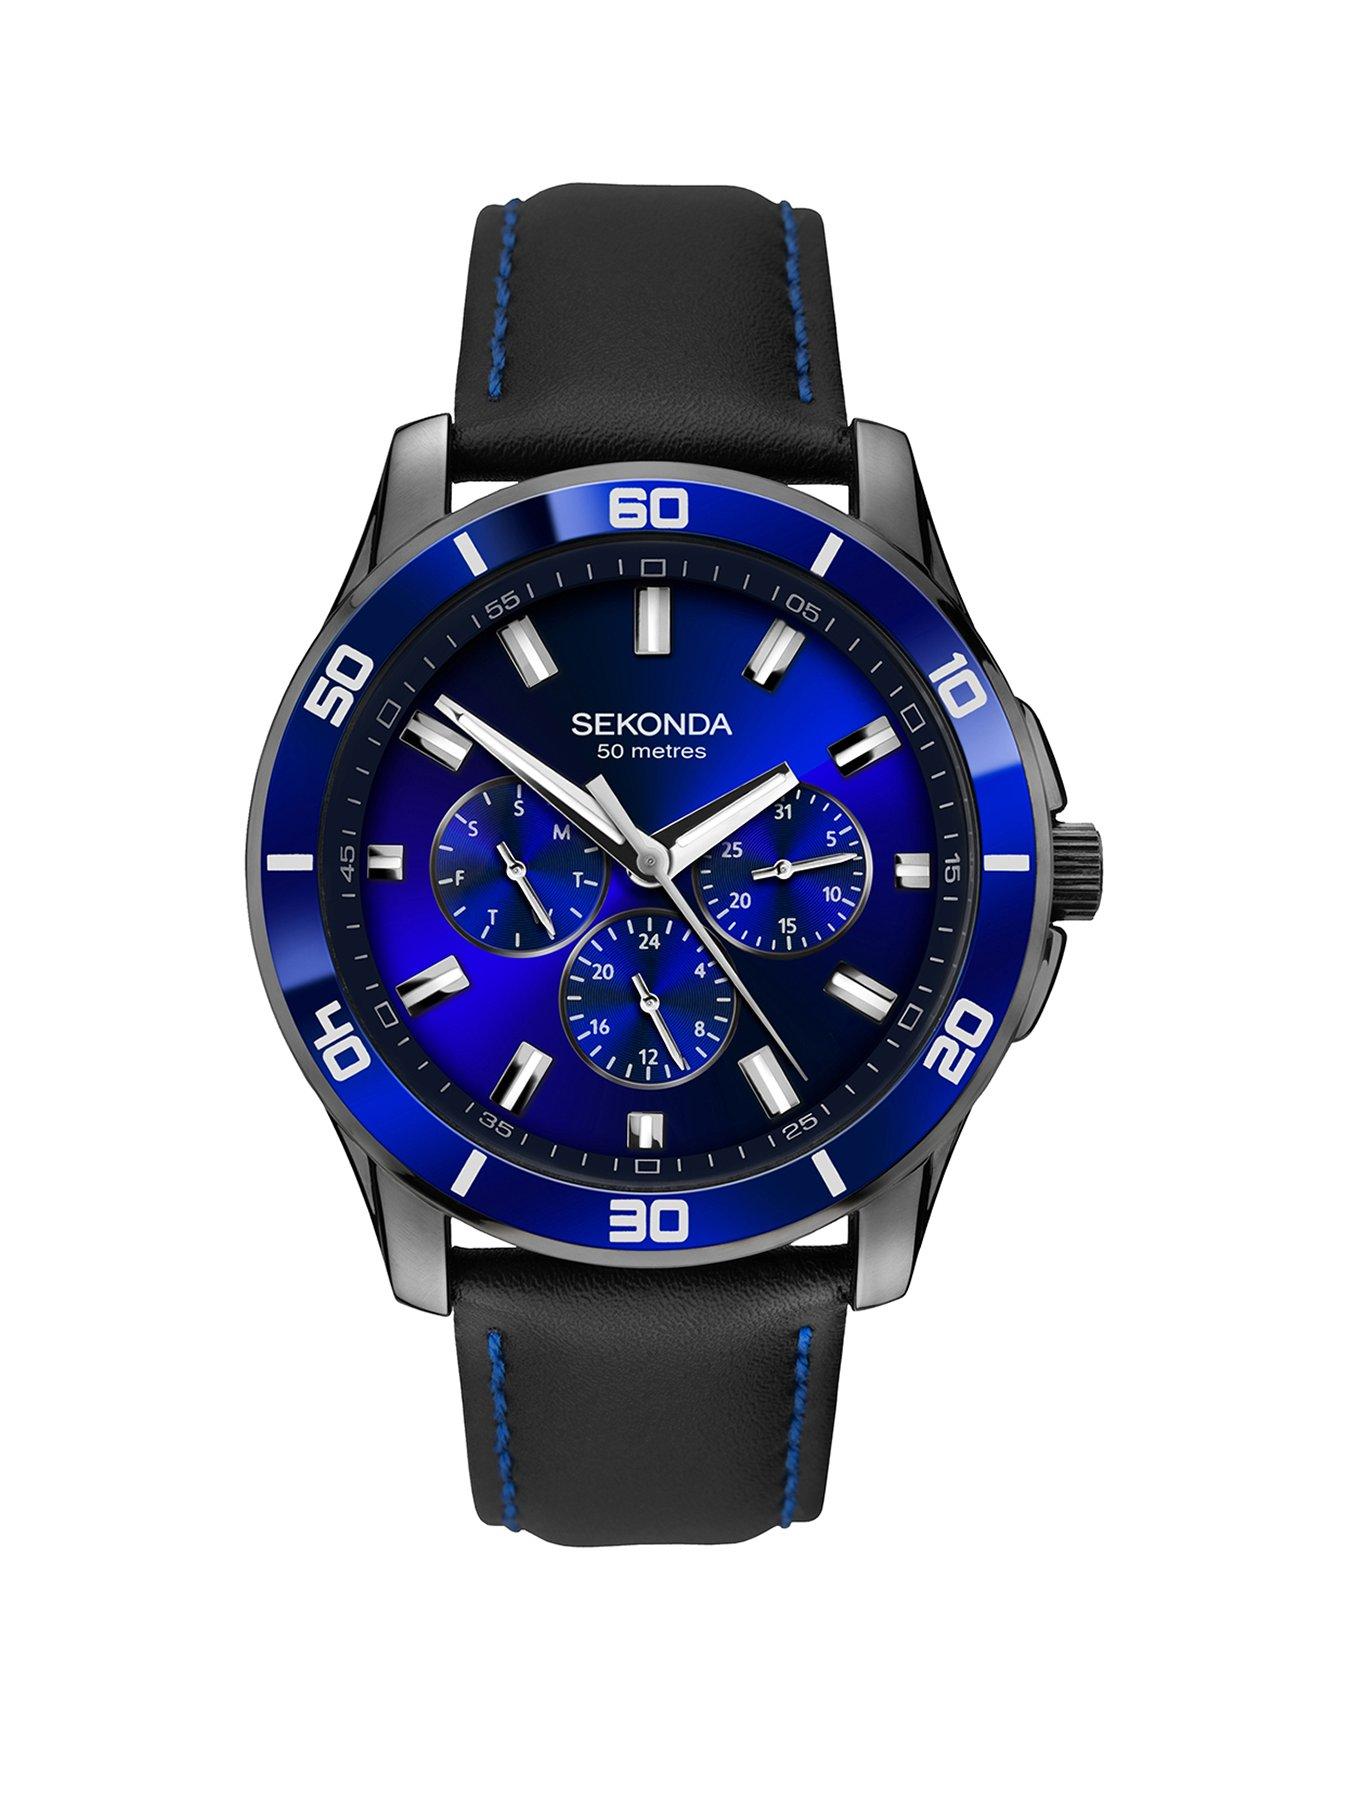 Latest Offers | Mens watches | Gifts & jewellery | www.littlewoods.com